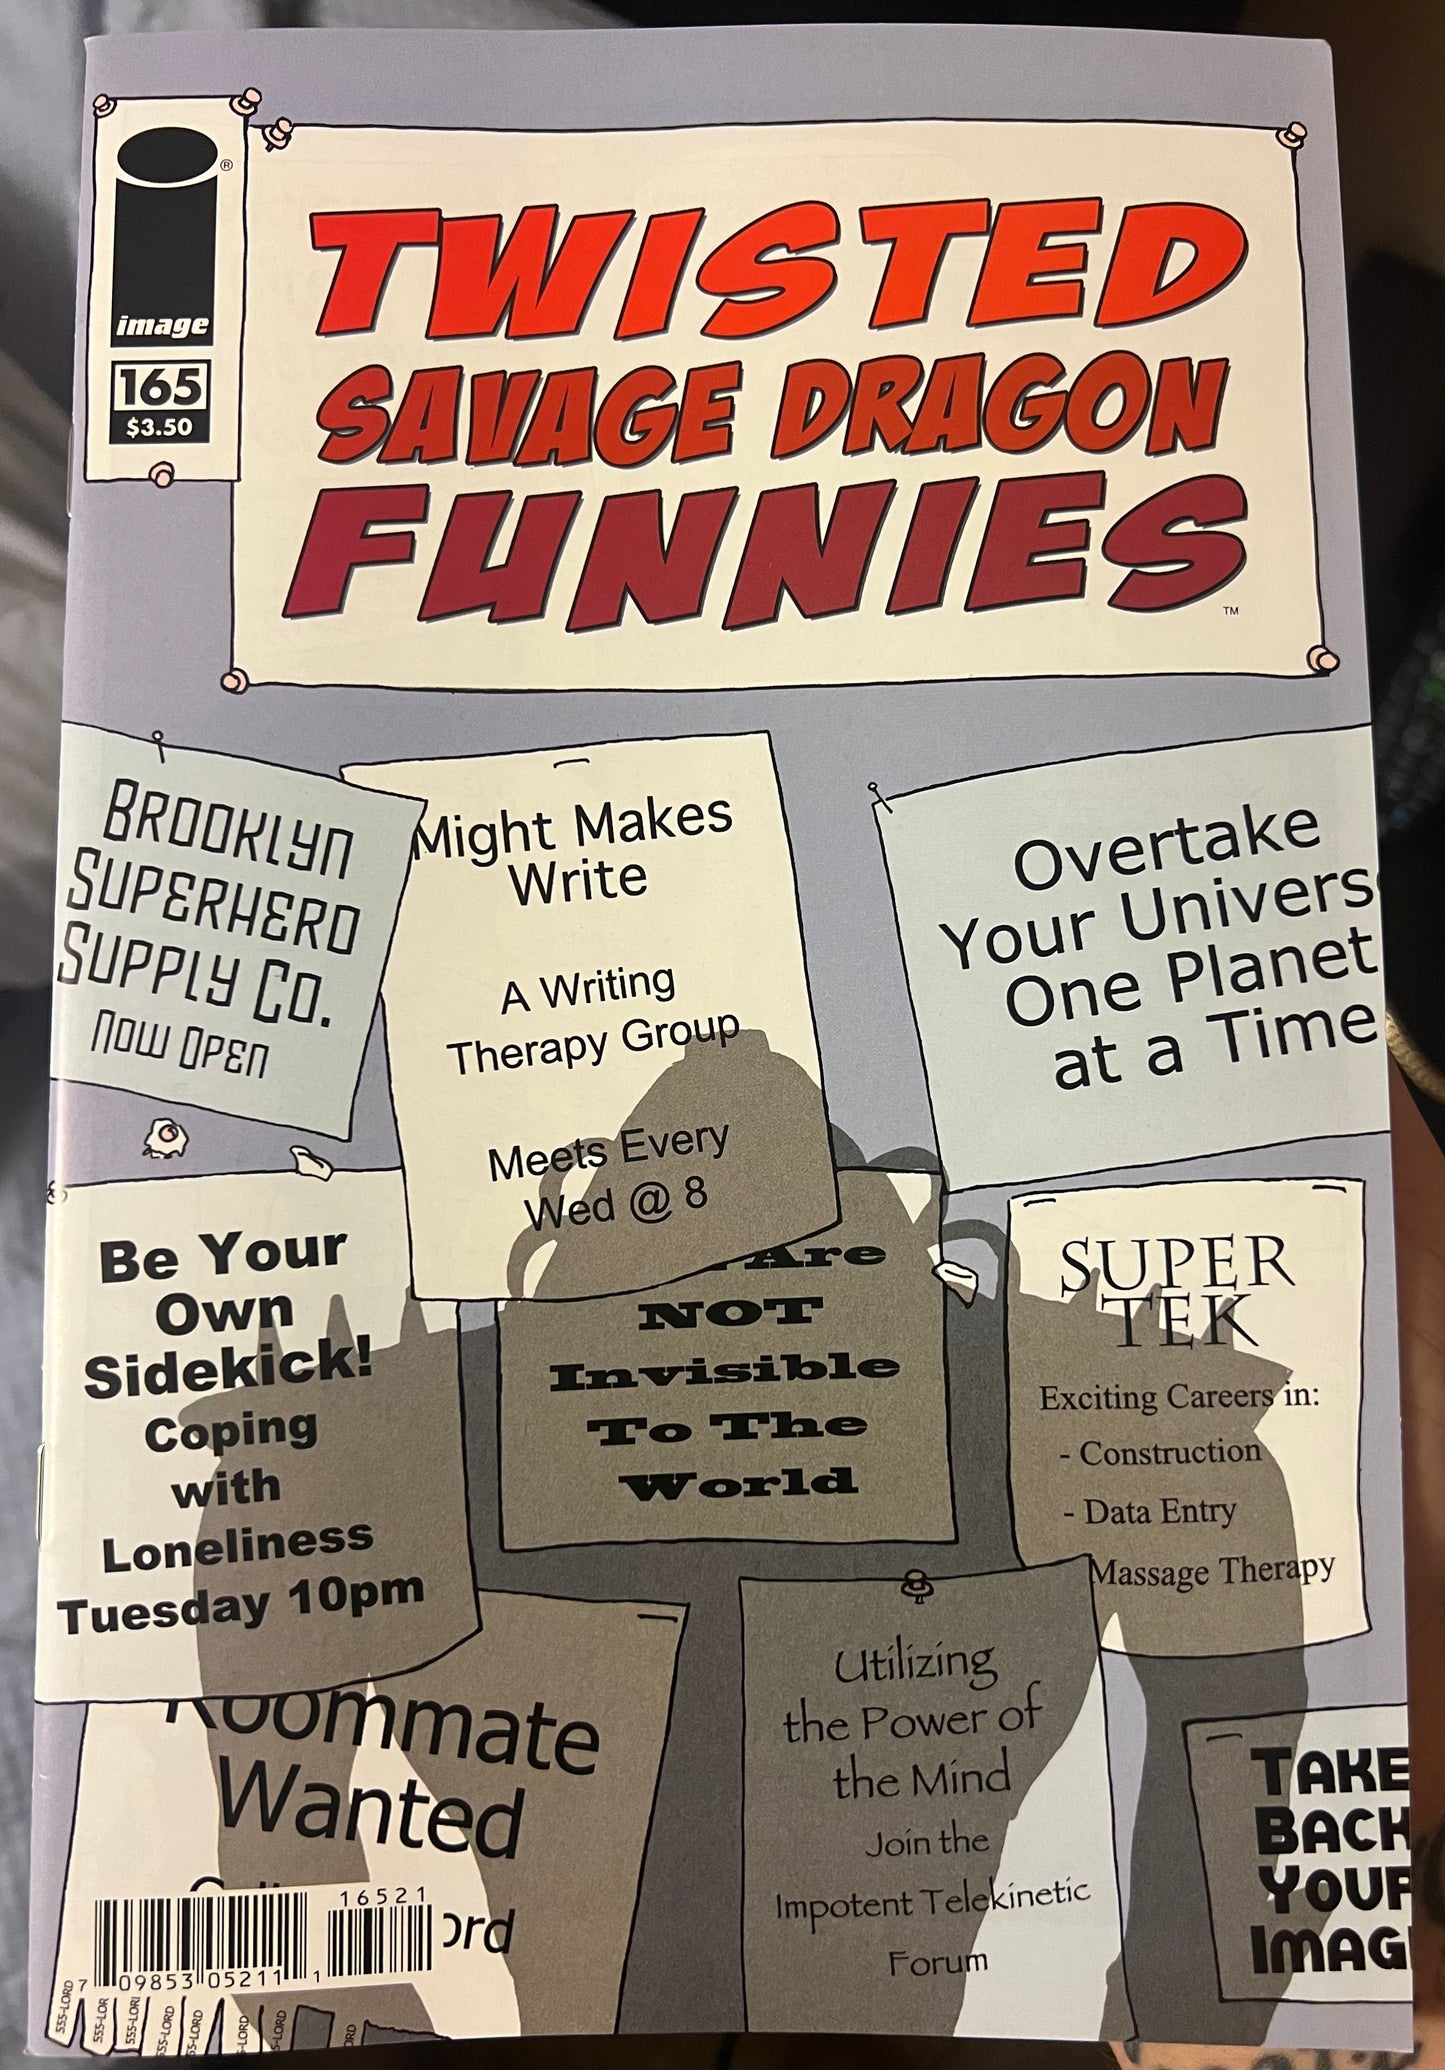 Savage Dragon #165 (Image Comics, 2010) (Flying Colors Variant) Rare, Hard to Find